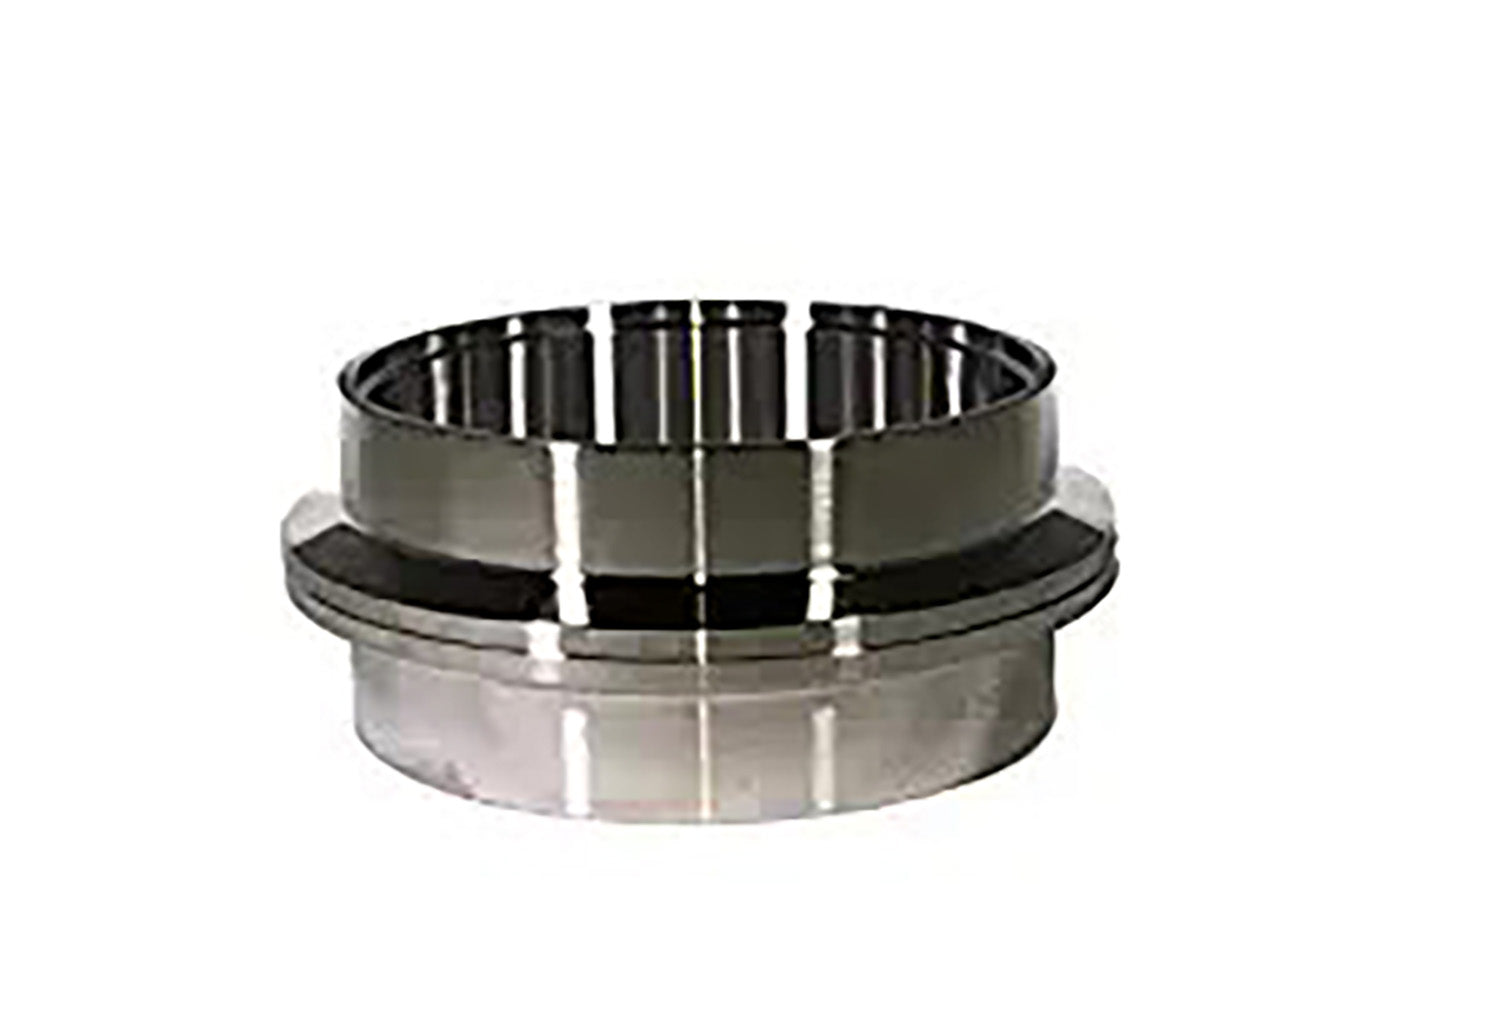 3-1/2" V Band Flange, T304 Stainless Steel, Pair (LH + RH)